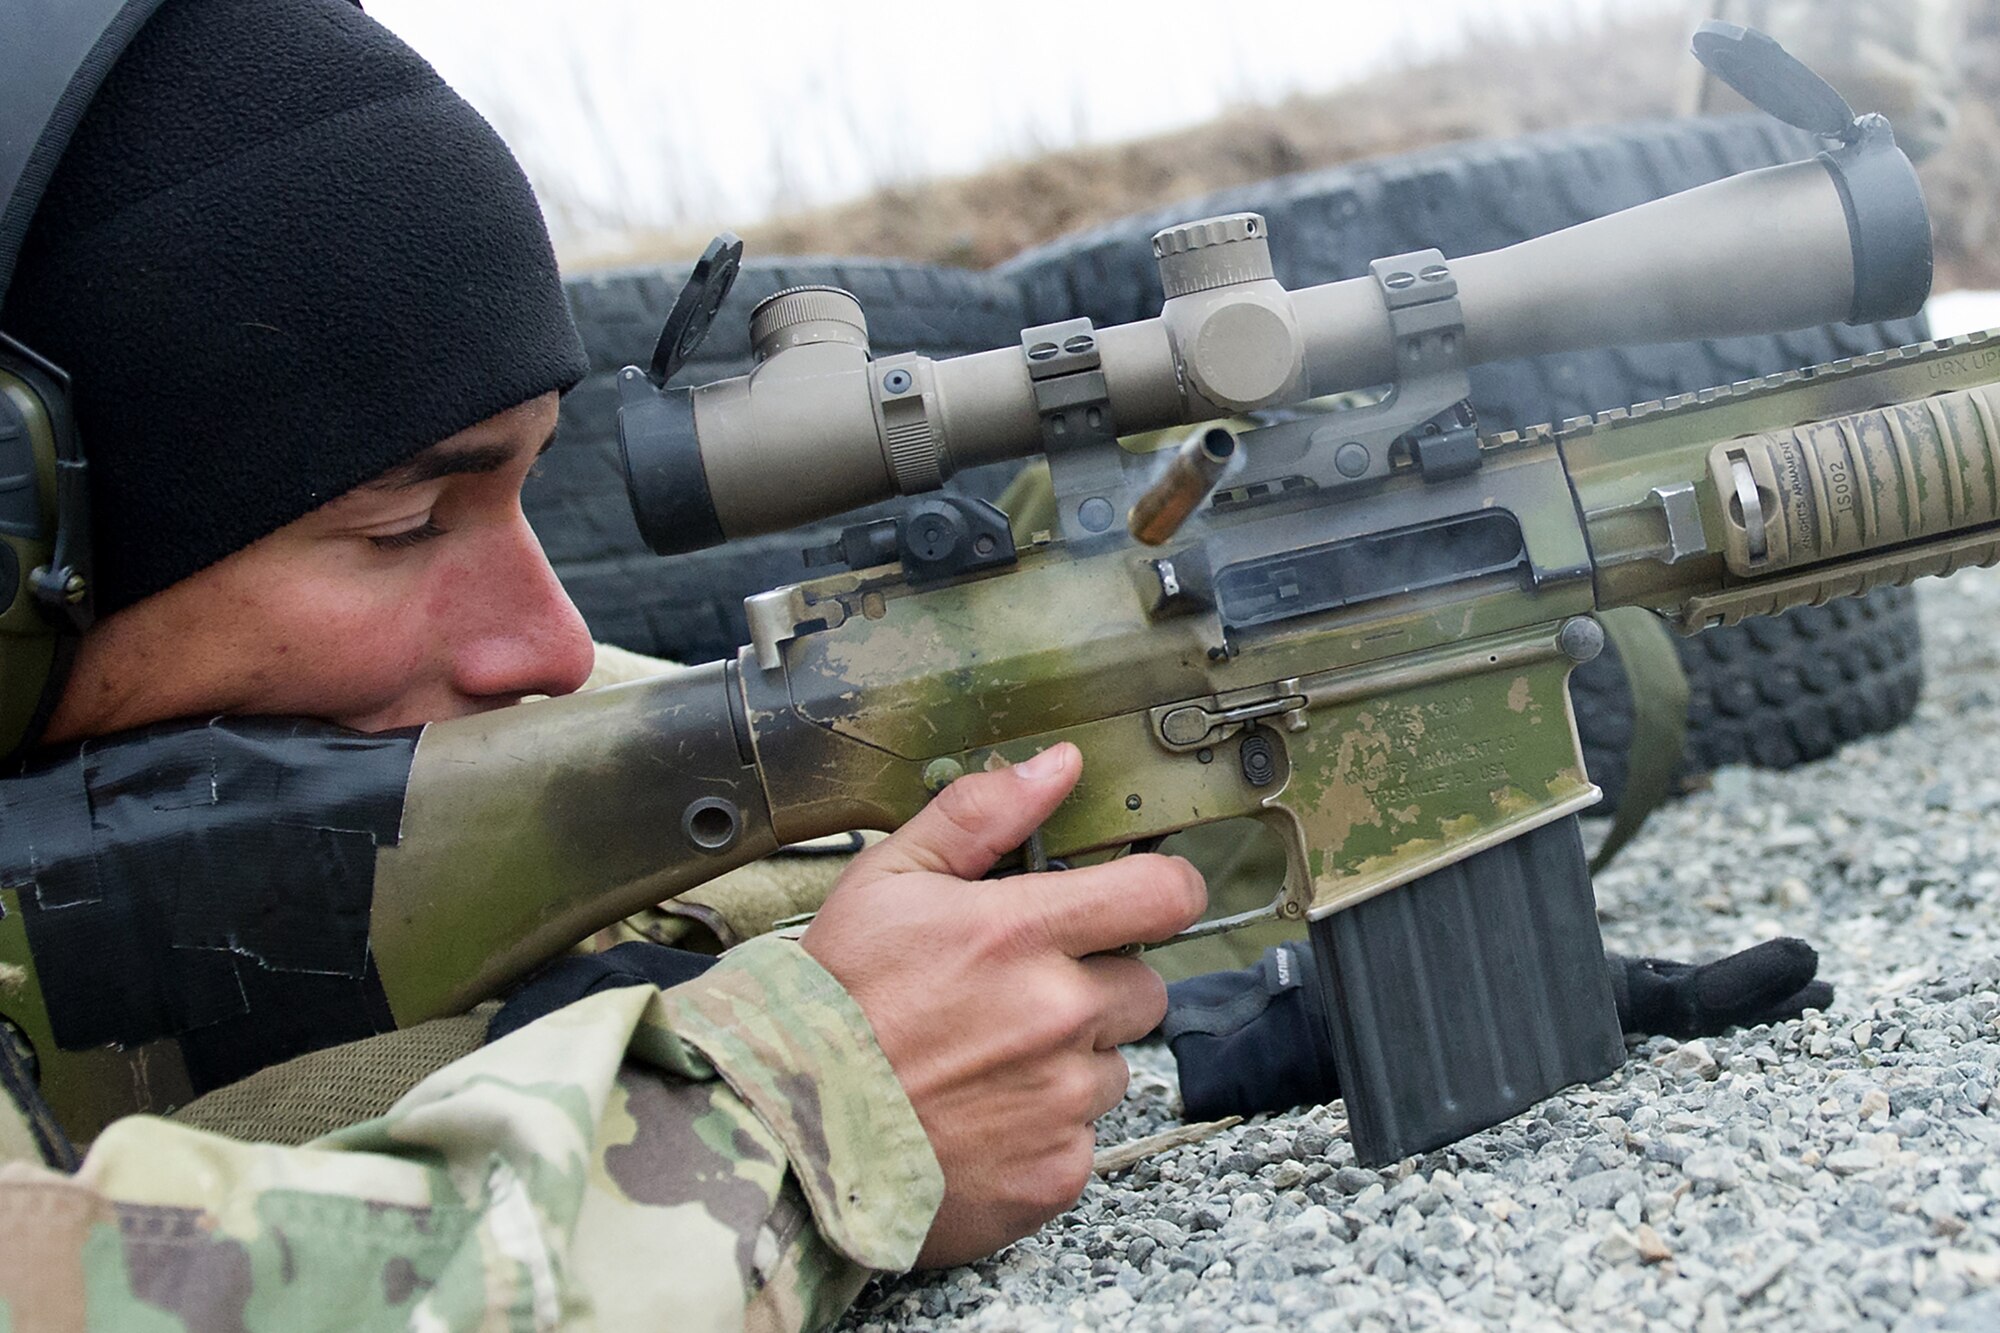 Army Spc. Arturo Dominguez, a native of Okeechobee, Fla., assigned to Charlie Troop, 1st Squadron, 40th Cavalry Regiment (Airborne), 4th Infantry Brigade Combat Team (Airborne), 25th Infantry Division, U.S. Army Alaska, fires at a target in the prone position with his M110 Semi-Automatic Sniper System on Statler range at Joint Base Elmendorf-Richardson, Alaska, April 6, 2018, during marksmanship training.  A sniper's main responsibility is to deliver discriminatory, highly accurate rifle fire against enemy targets that cannot be engaged successfully by the regular rifleman due to range, size, location, fleeting nature, or visibility.